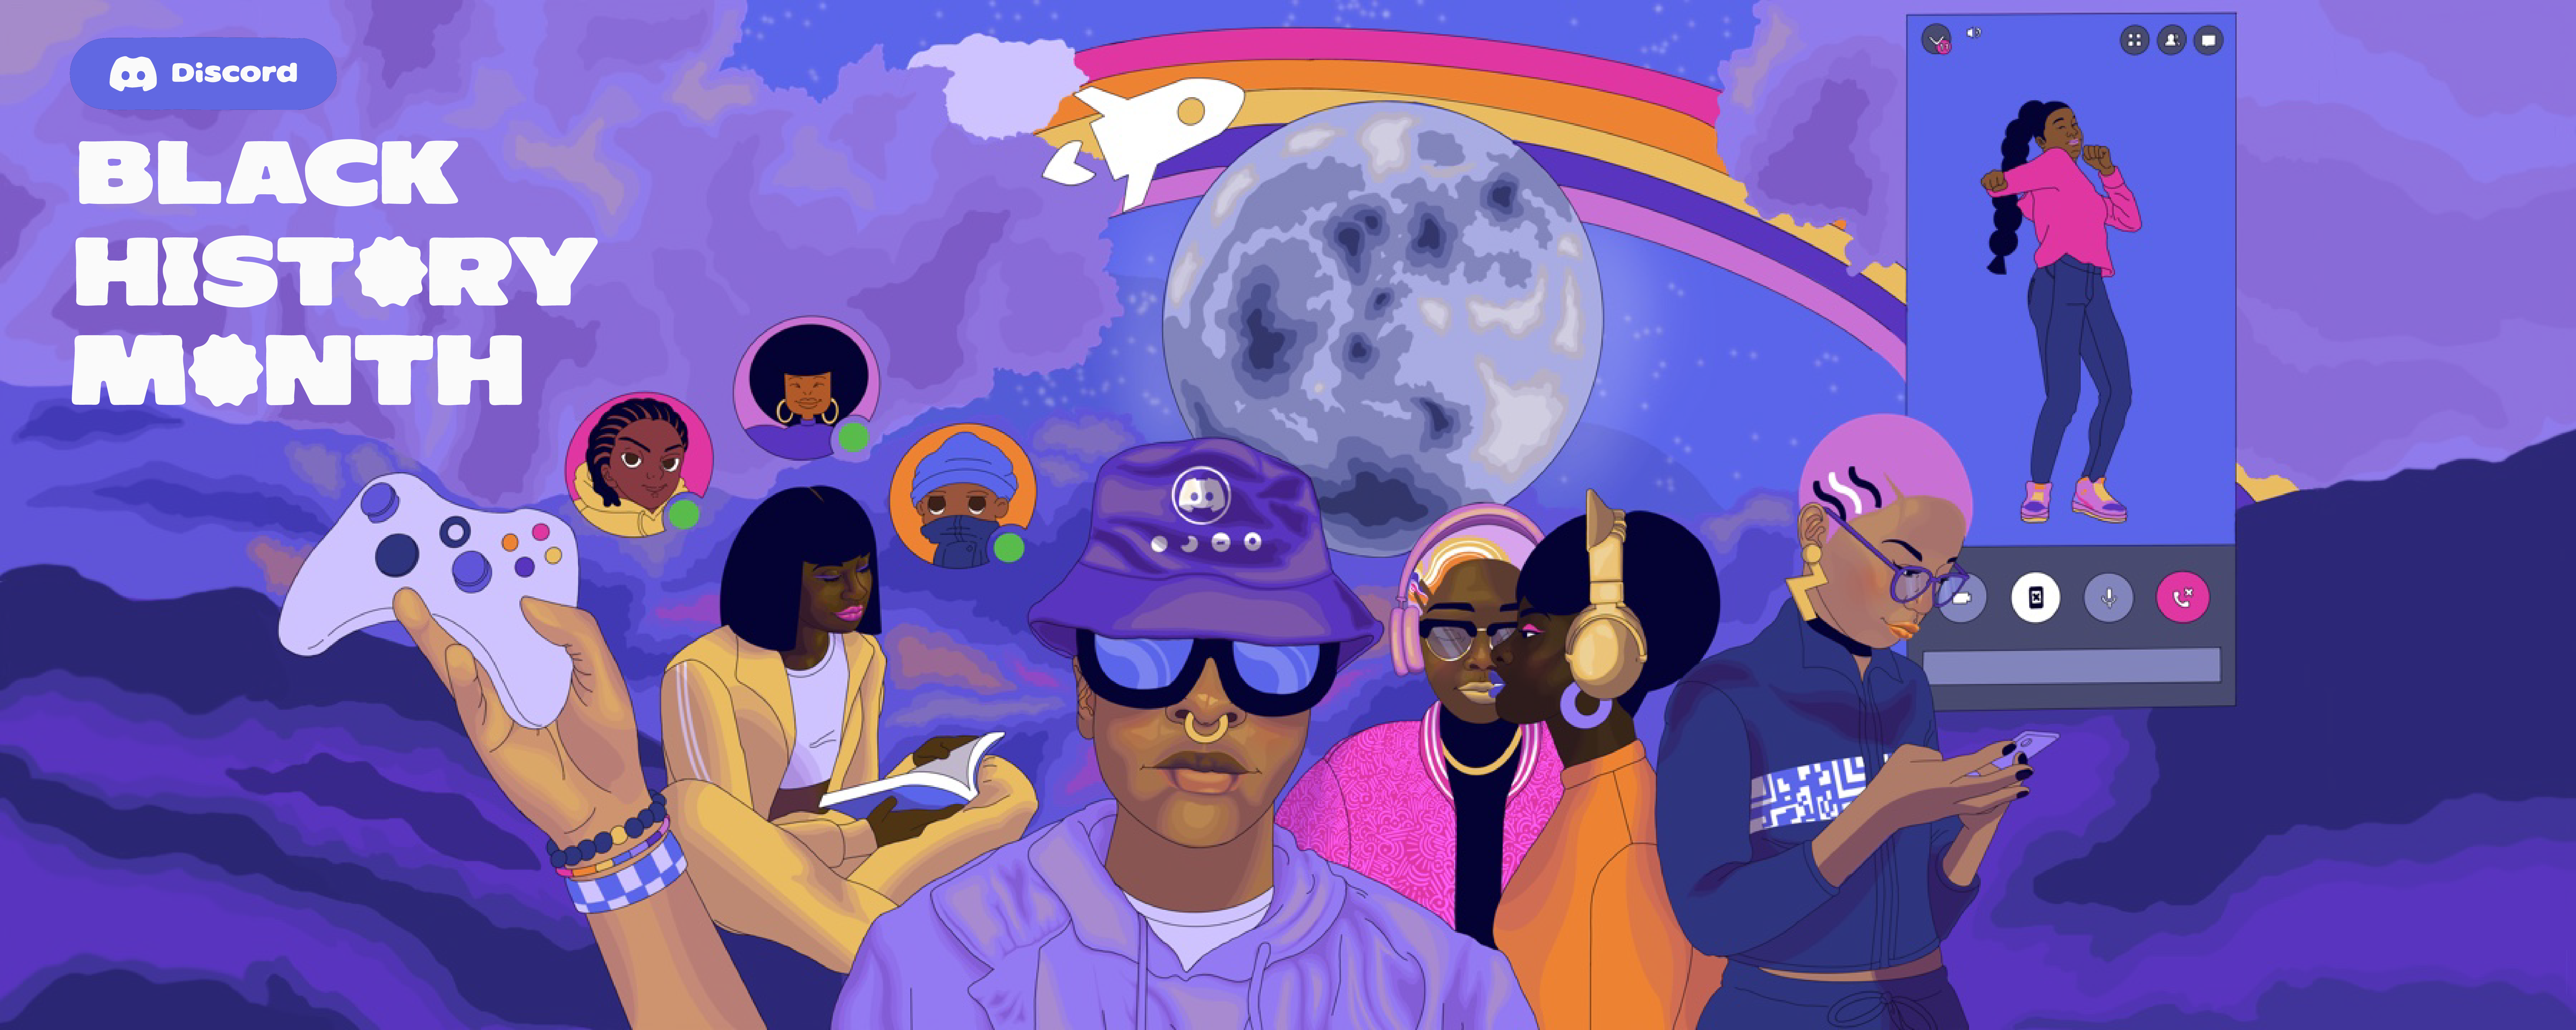 A painting depicting Black creators and community members streaming, sharing, talking, and gaming together. A Discord color scheme encompasses the community. 